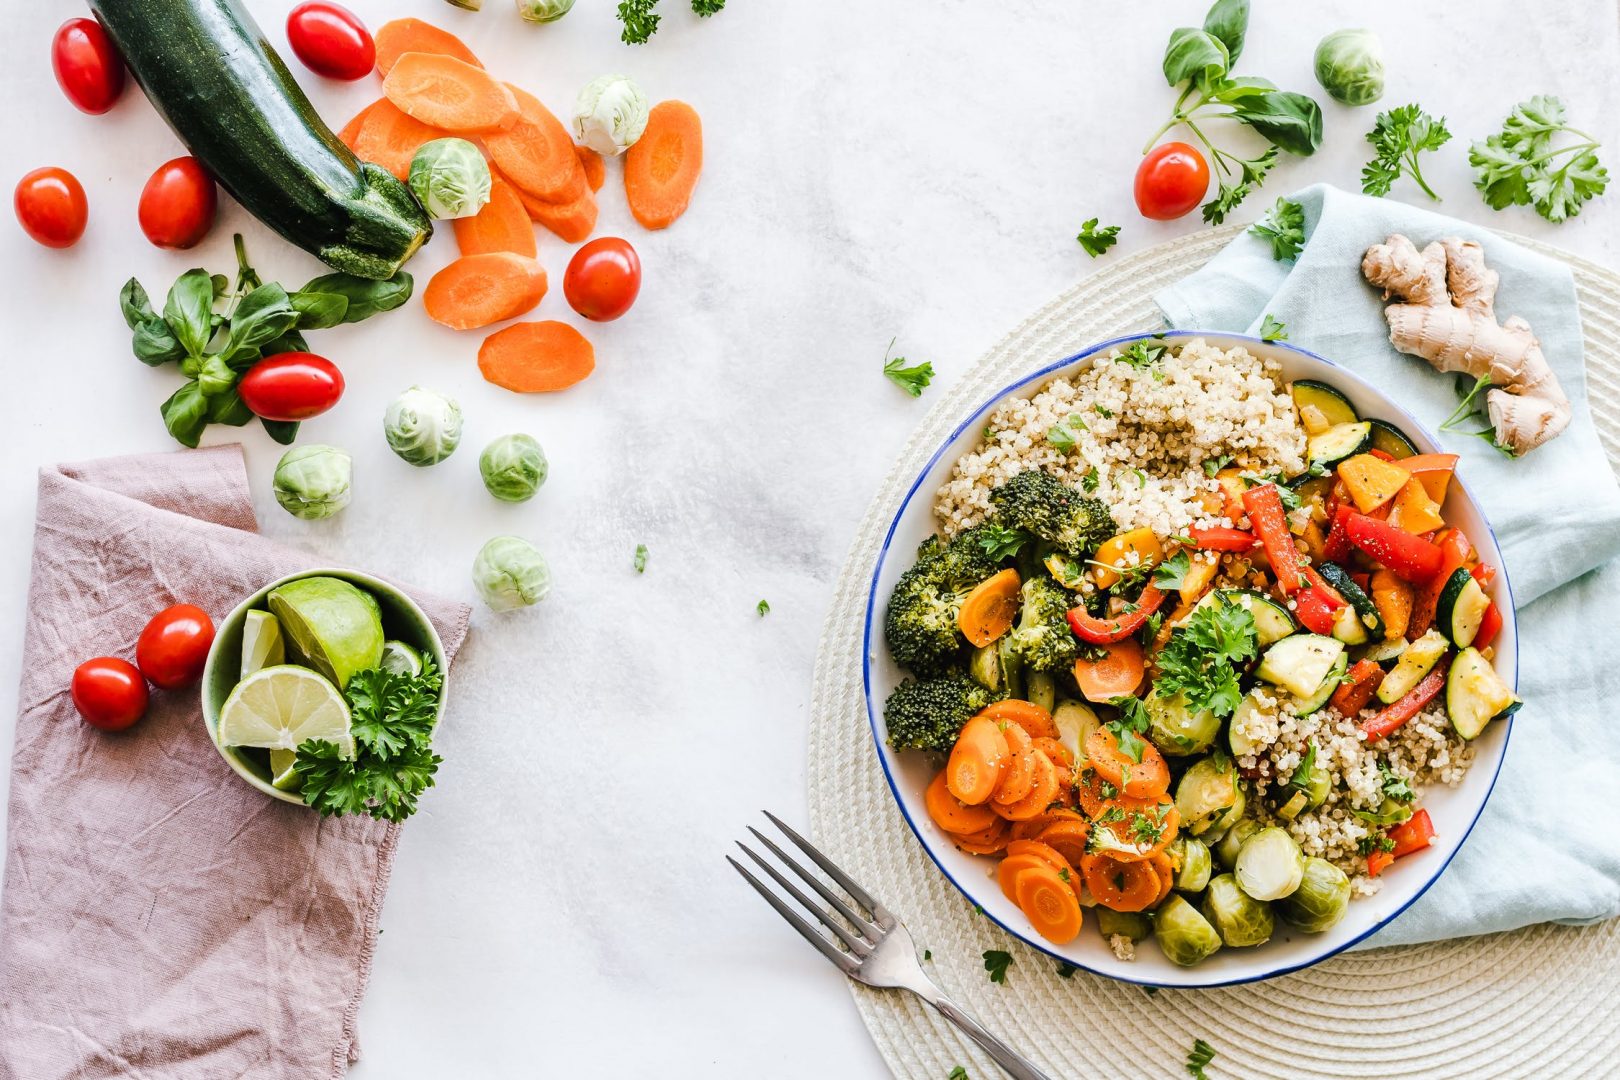 Paleo + Keto & The Health News For March 2019